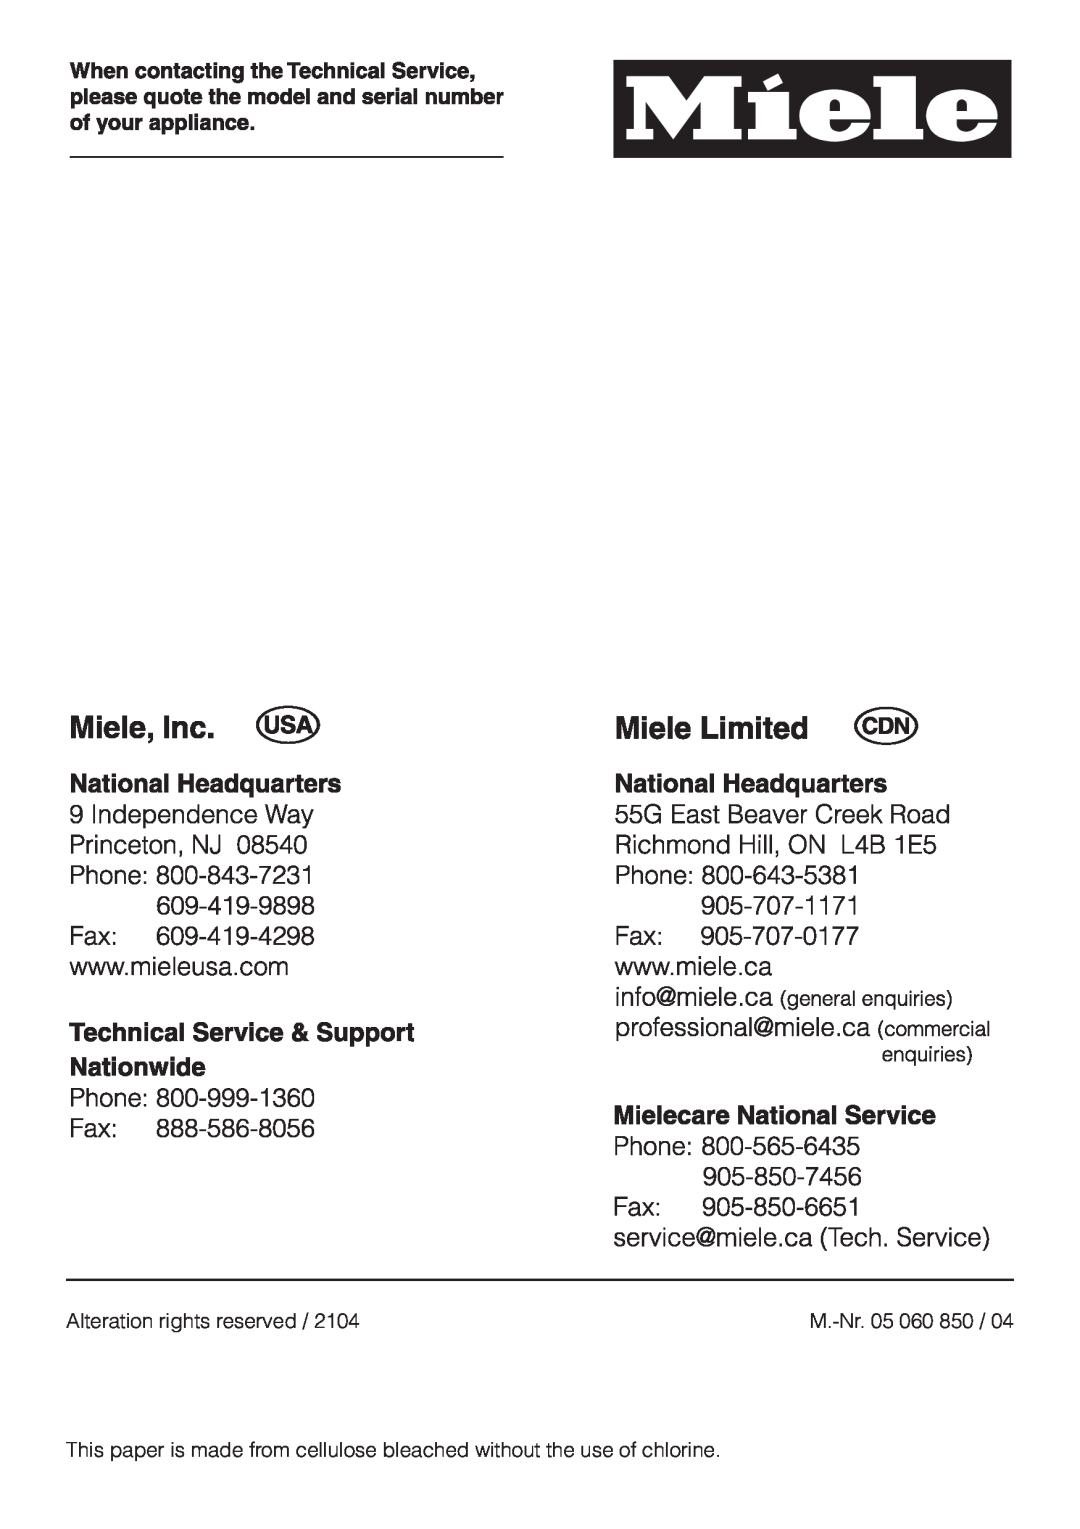 Miele KM412, KM400 operating instructions Alteration rights reserved, M.-Nr 